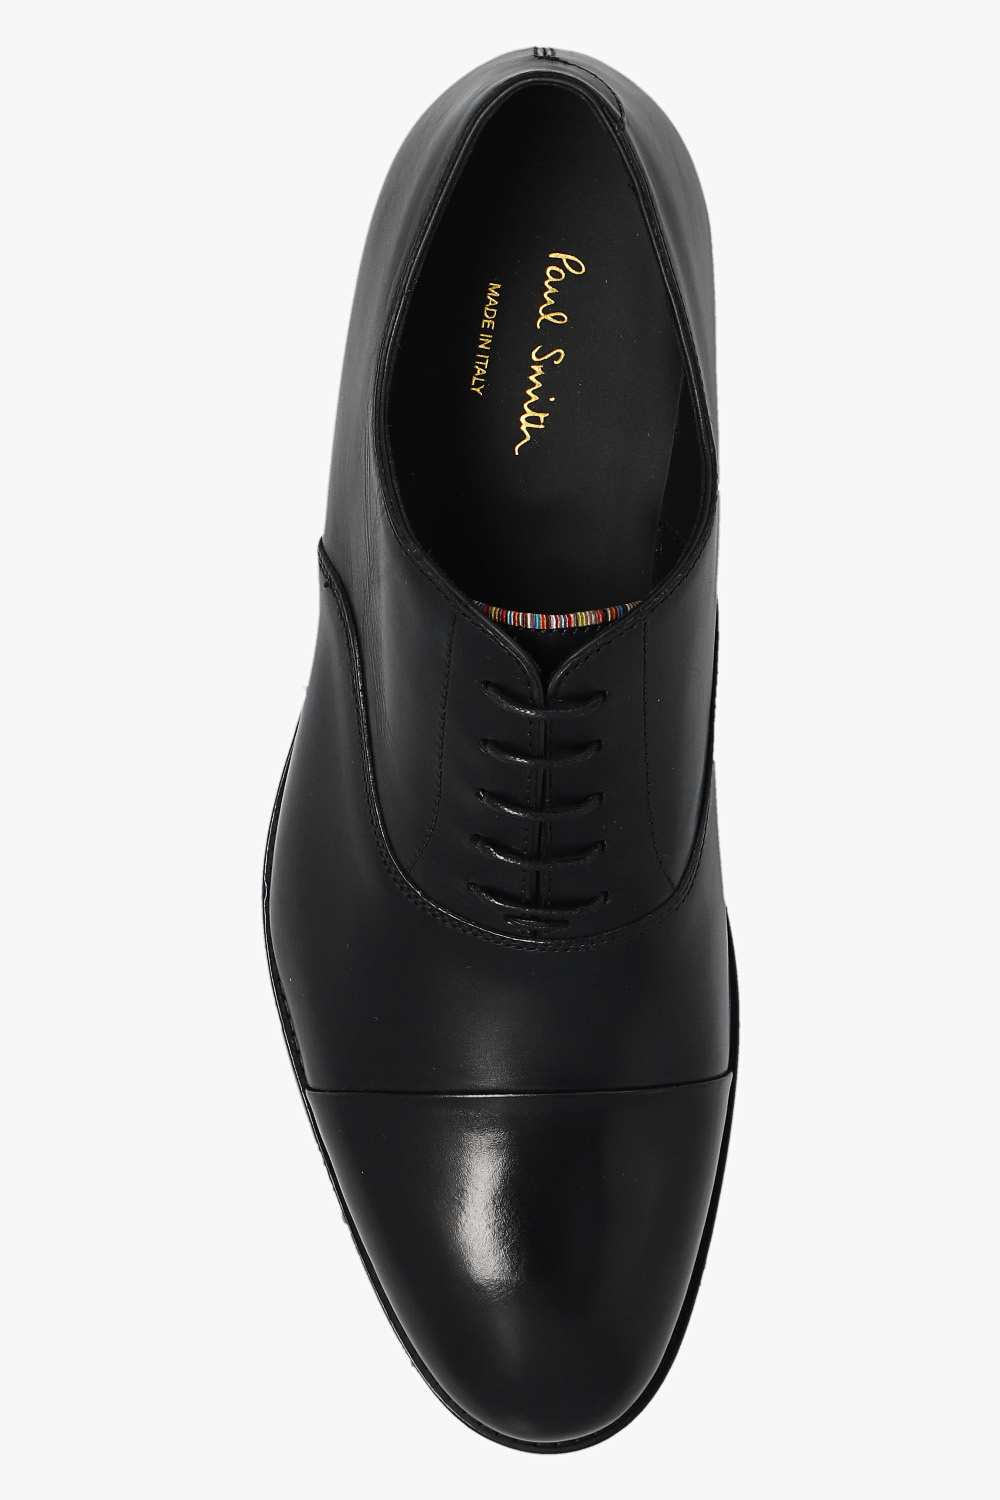 Paul Smith ‘Brent’ leather shoes